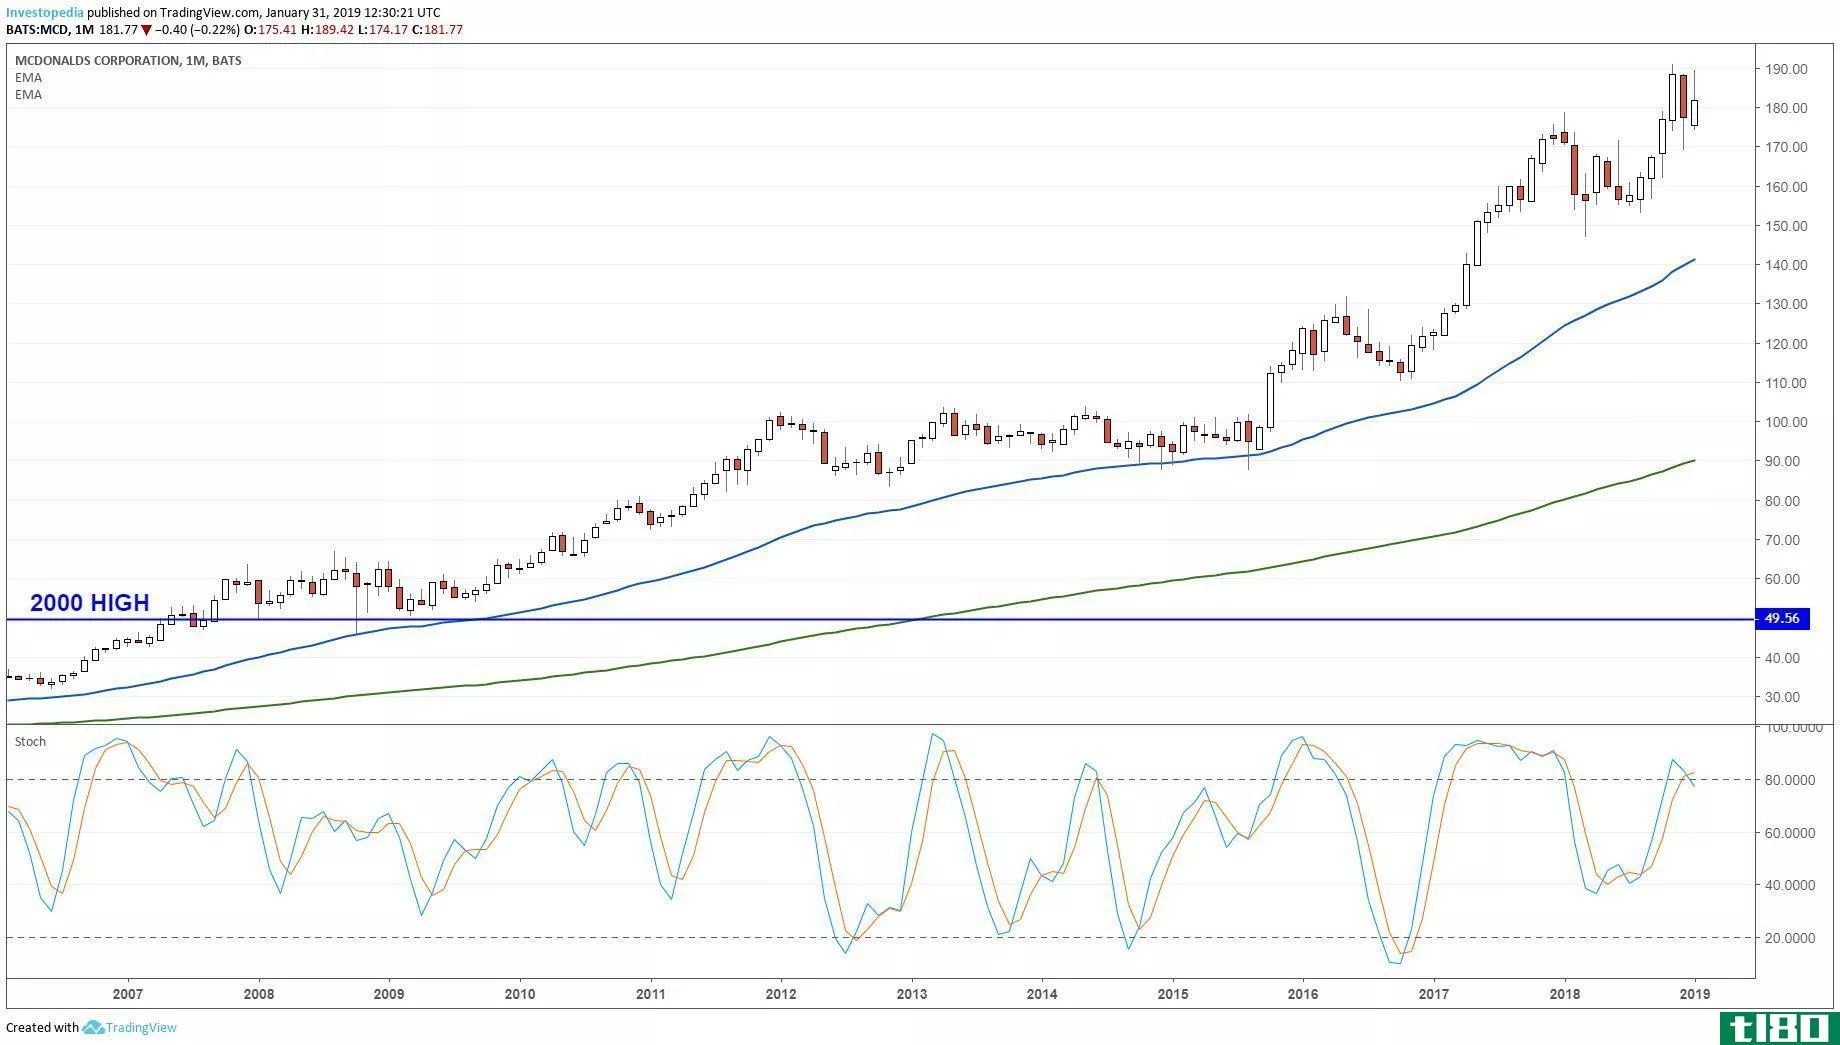 Monthly chart showing the share price performance of McDonald's Corporation (MCD)